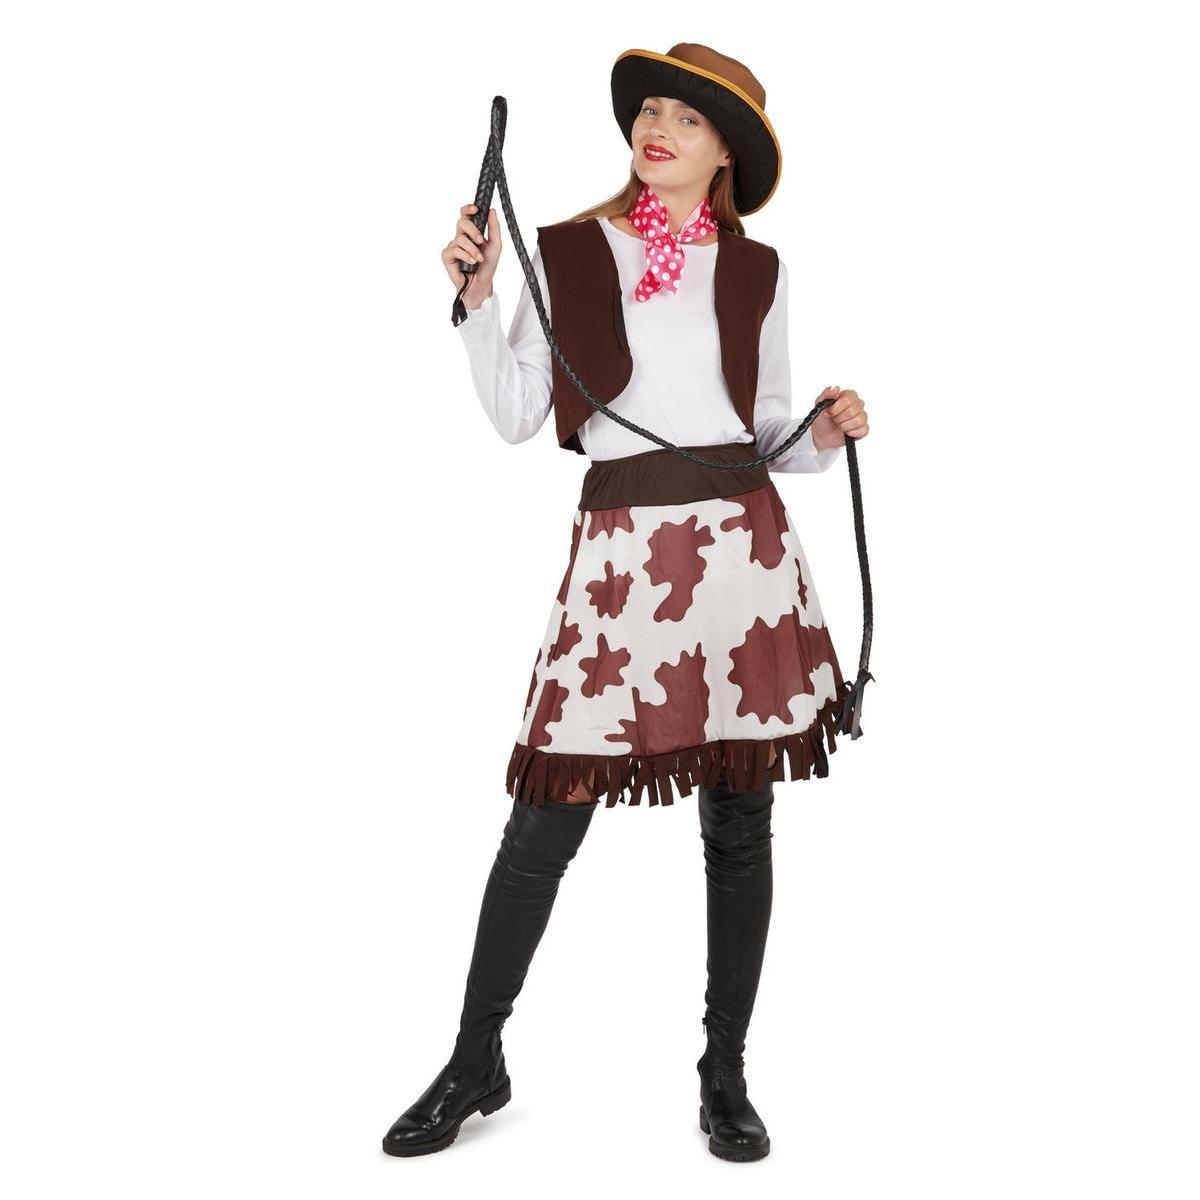 Costume adulte Cow-Girl - S/M